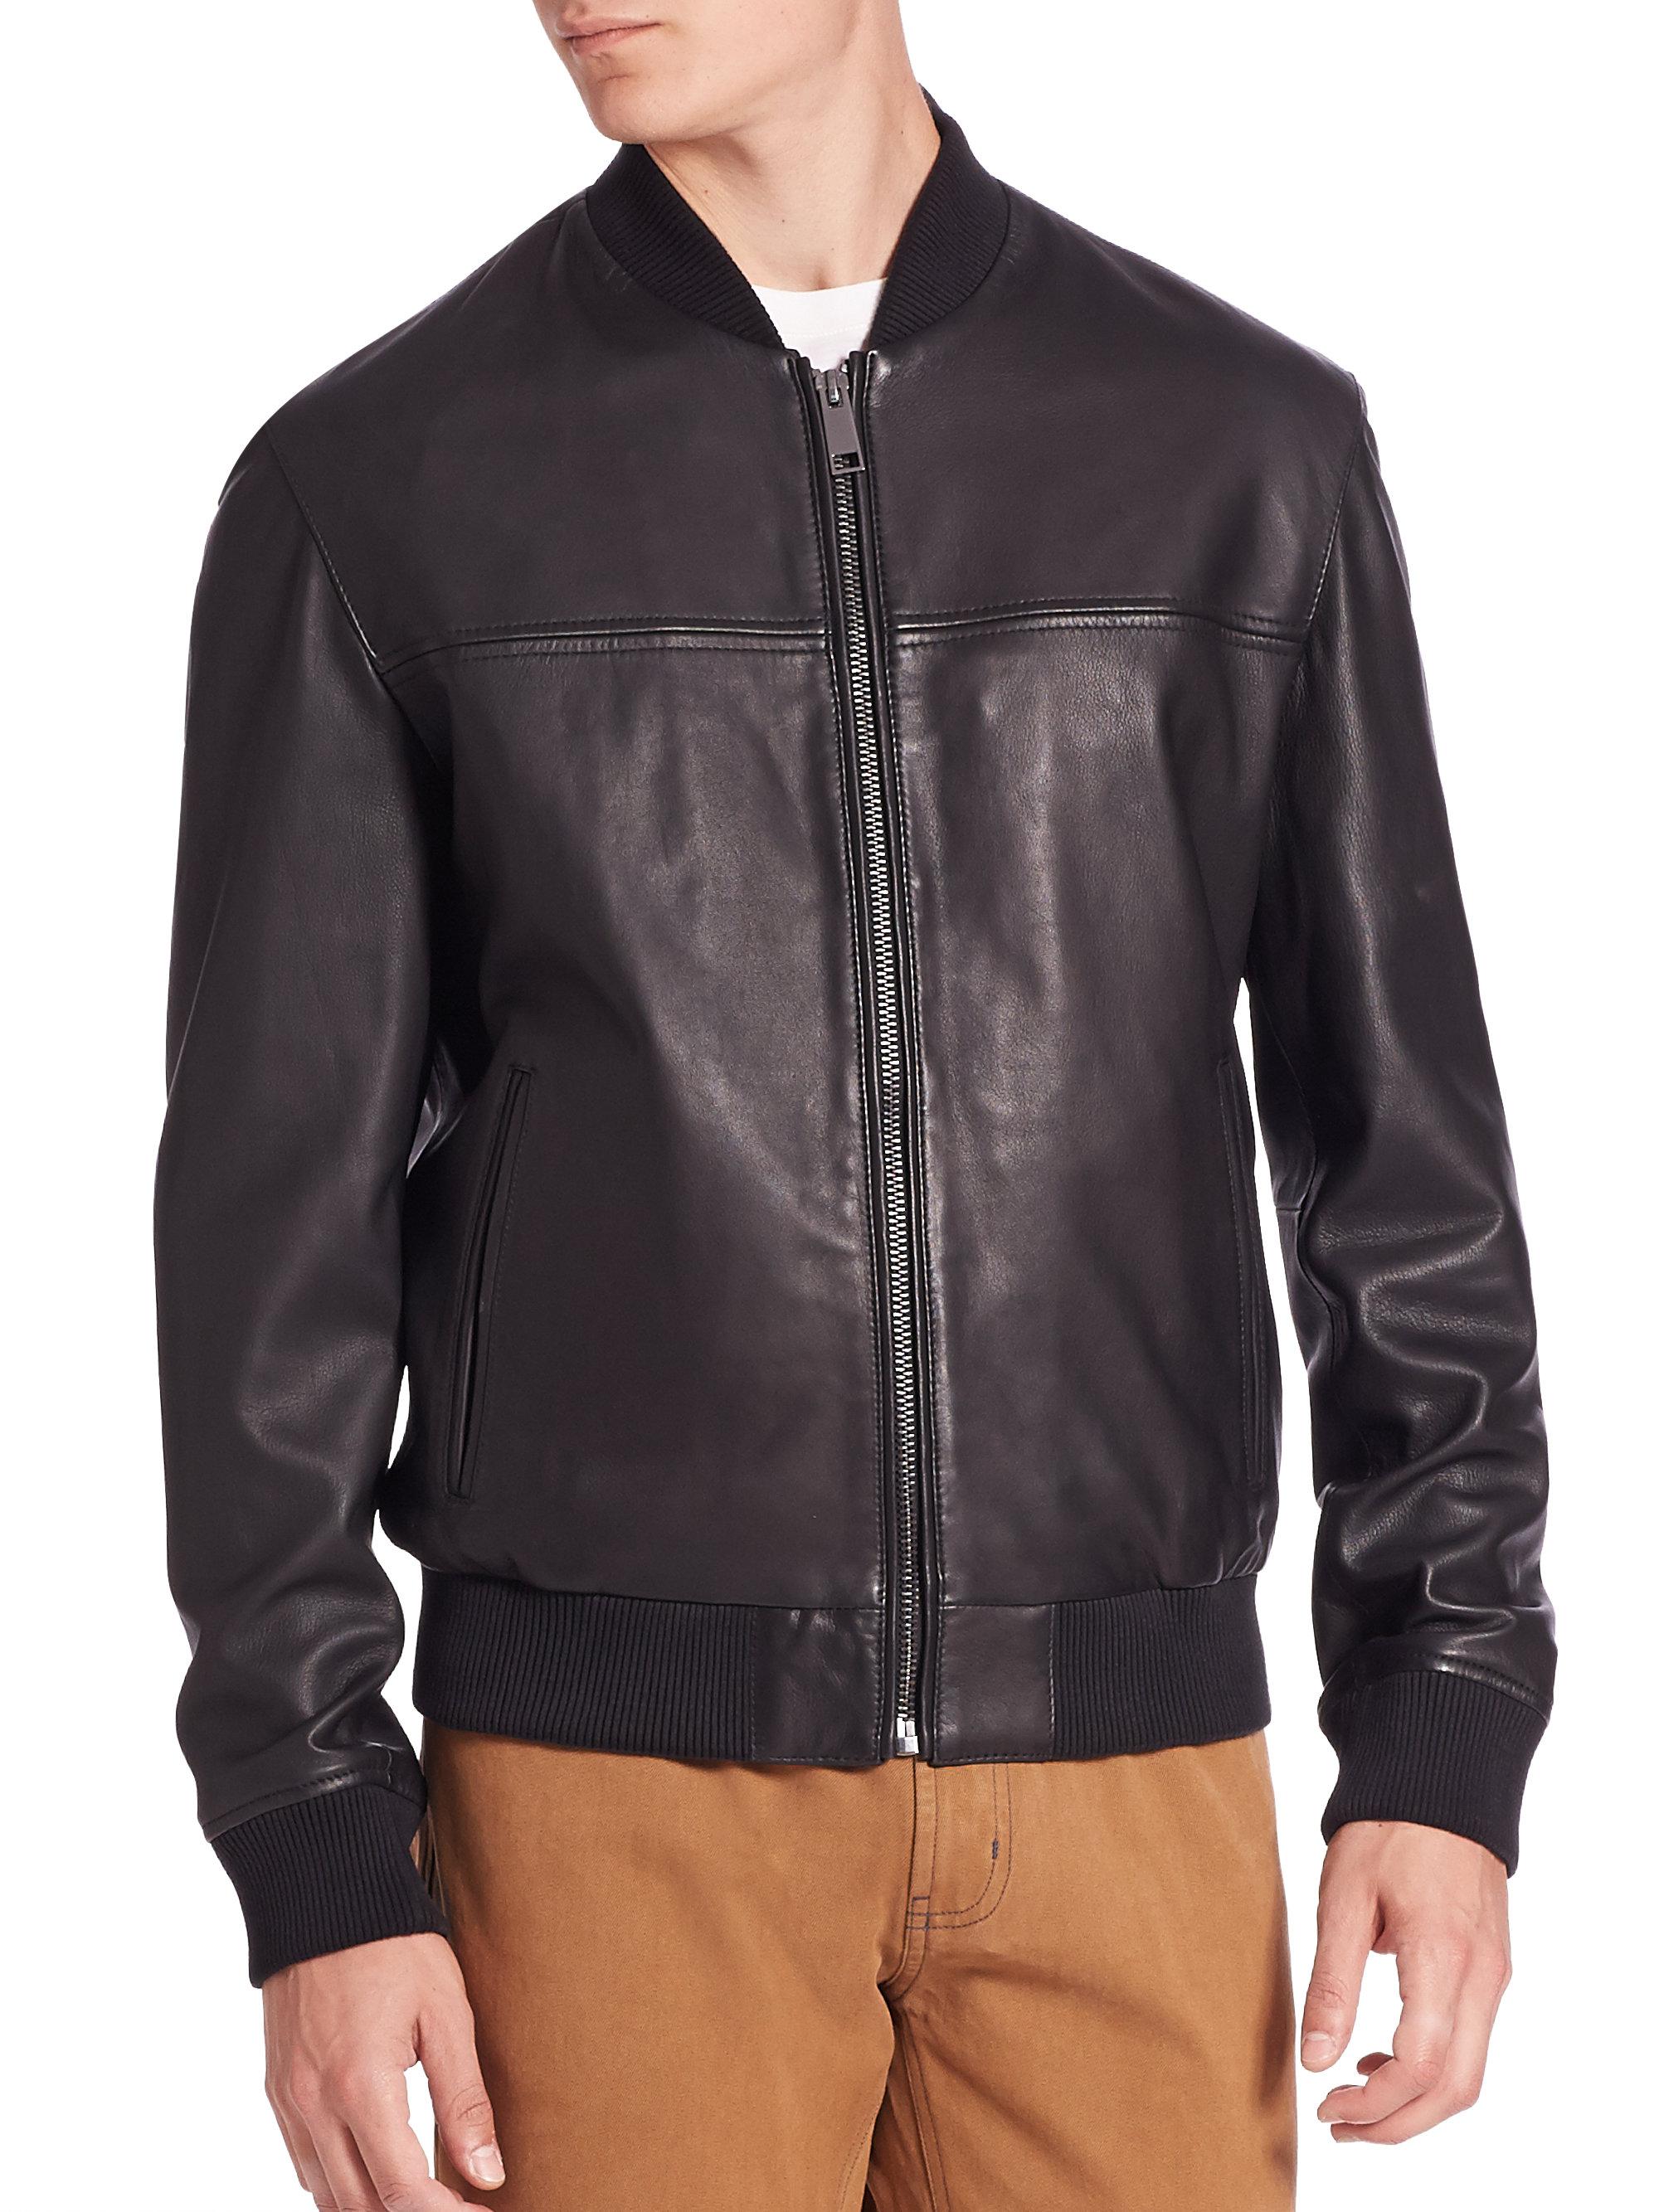 Lyst - Saks fifth avenue Modern Zip-front Leather Bomber Jacket in ...